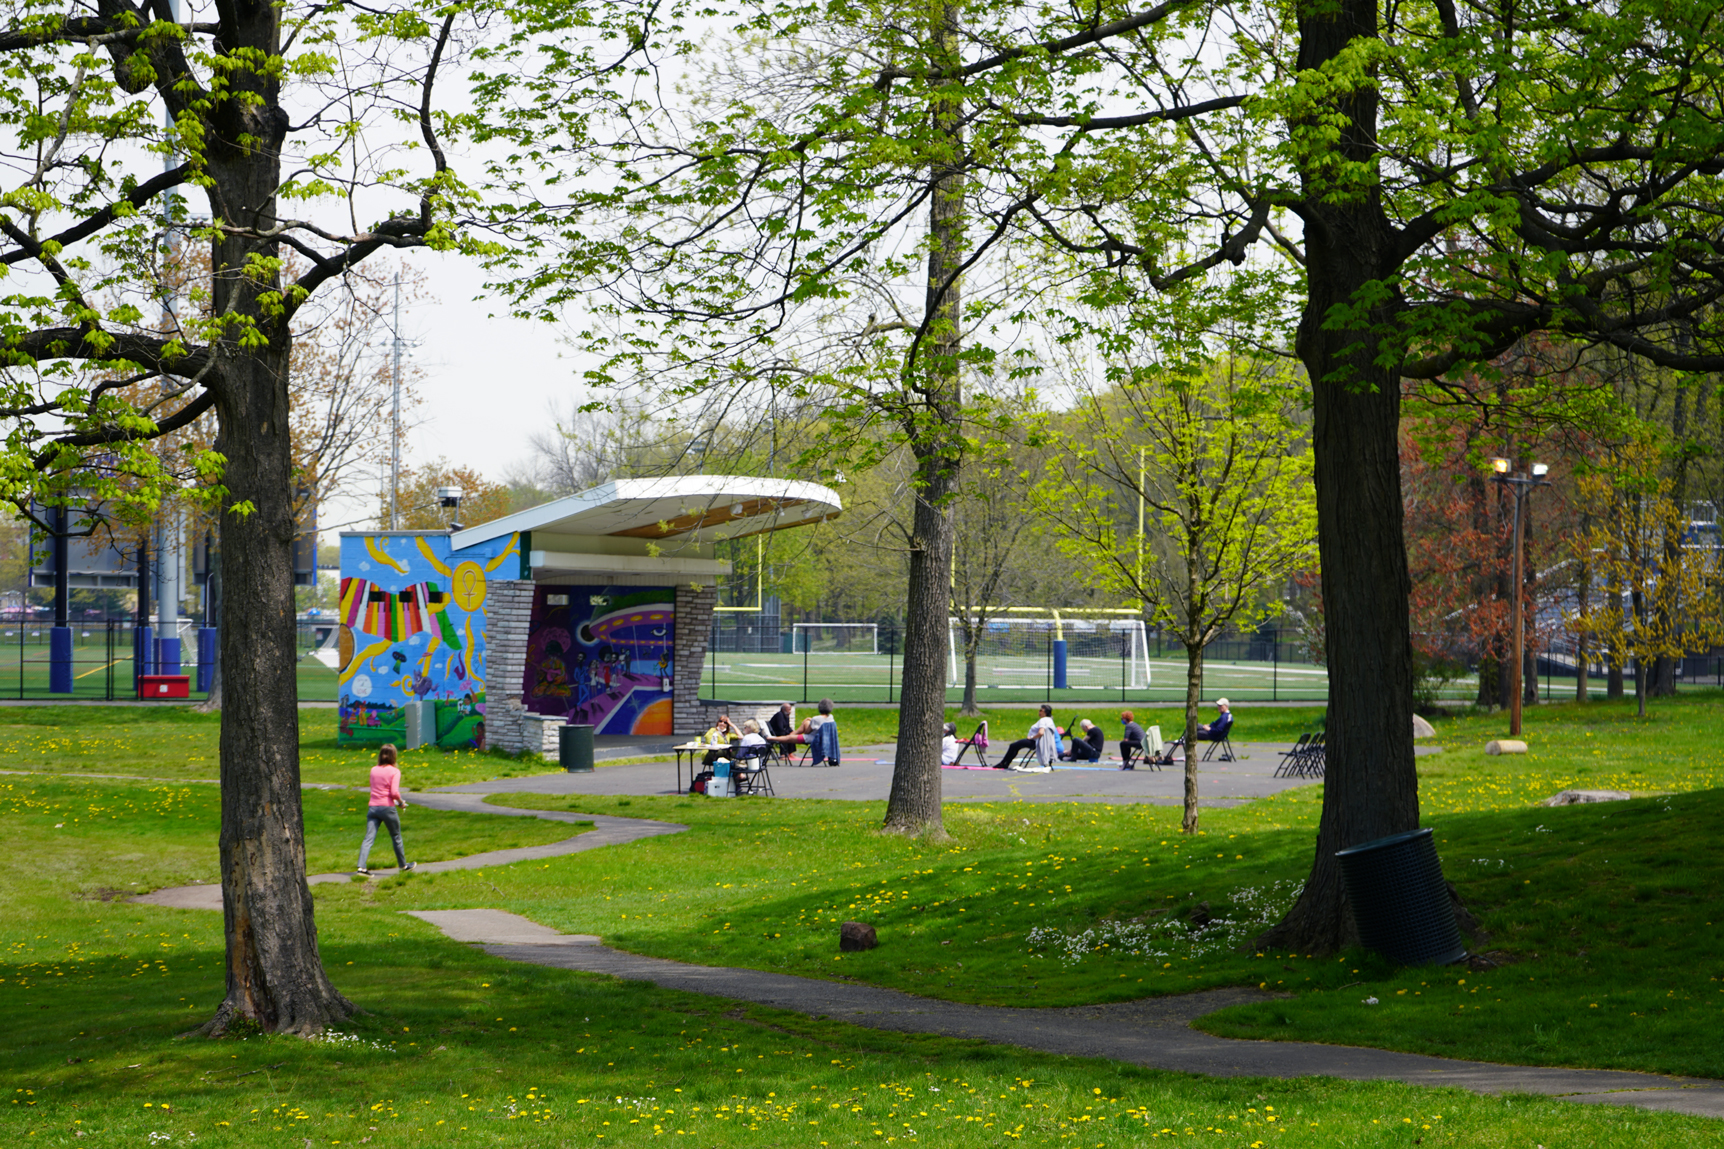 People gather at a local park in Teaneck, New Jersey